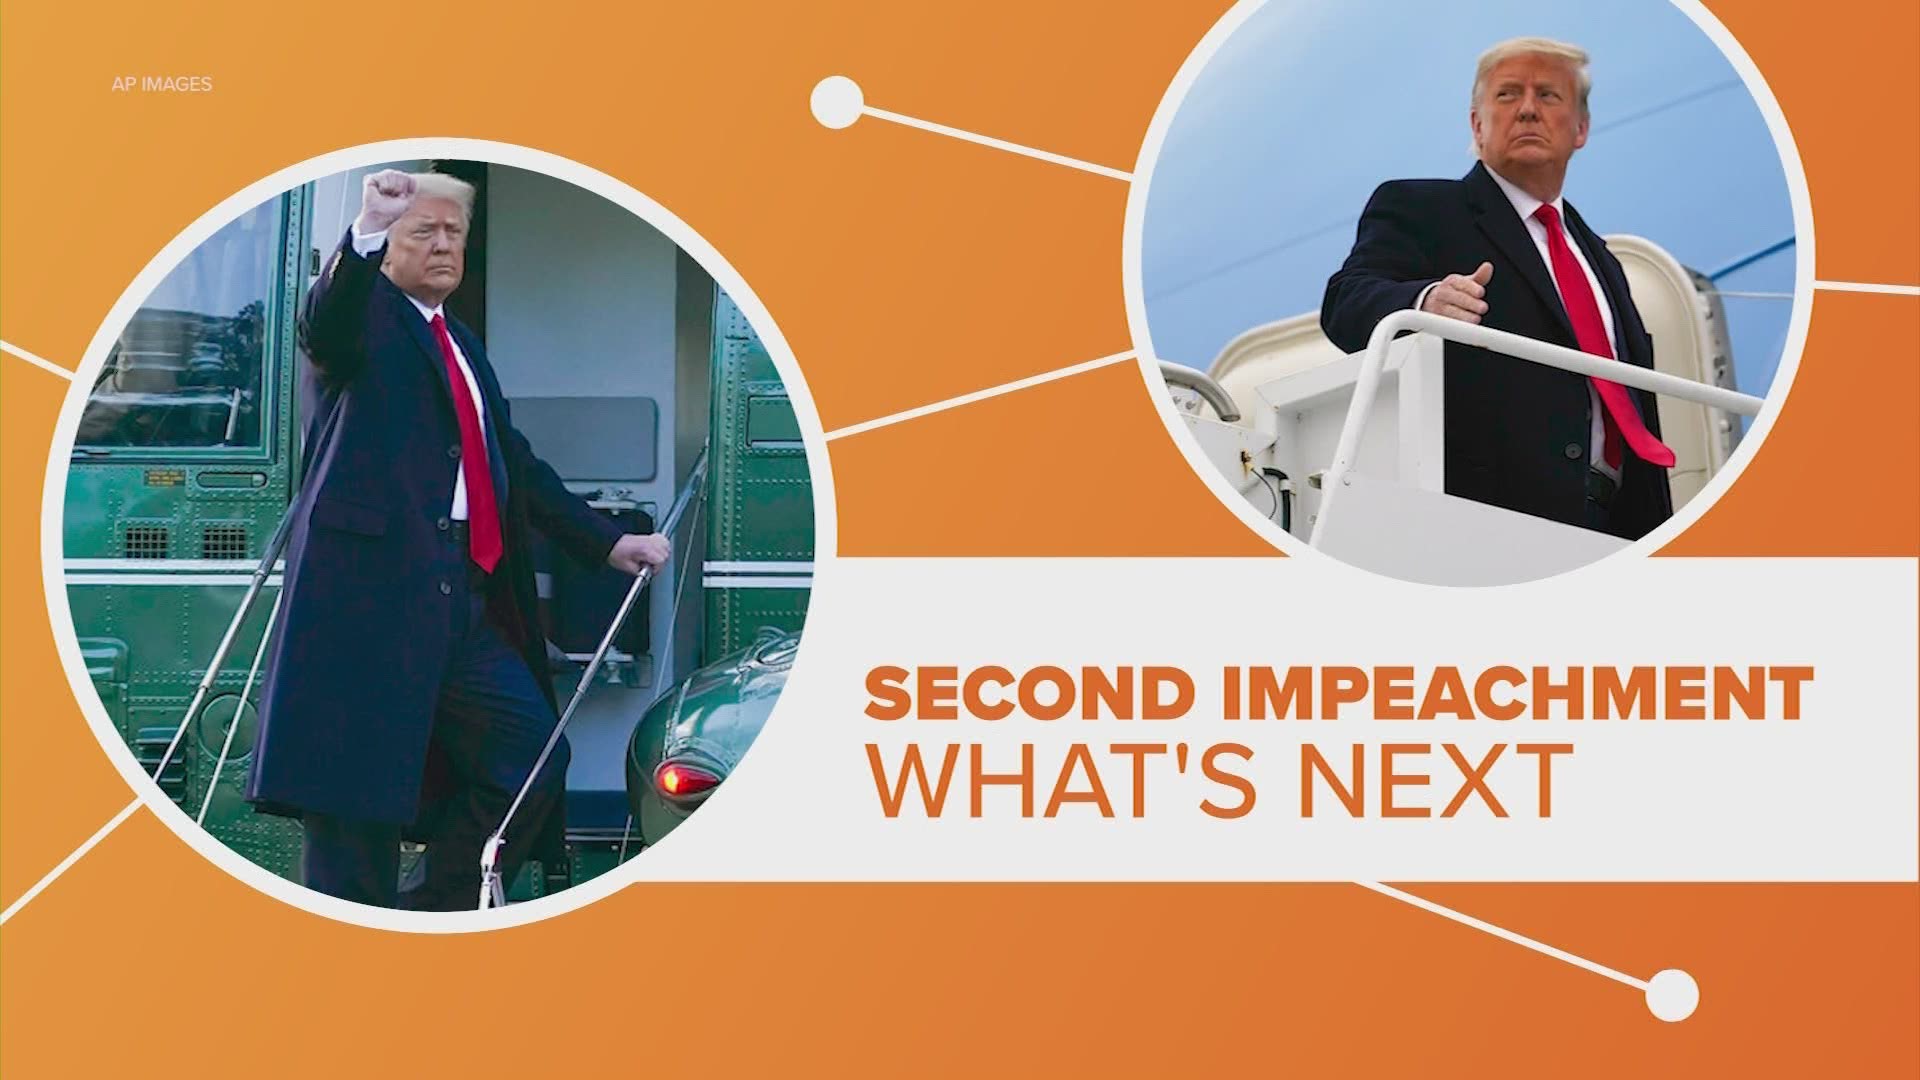 While holding a second impeachment trial for a president is unprecedent, we do have some idea how it will go. And it's clear, both sides want it to go quickly.